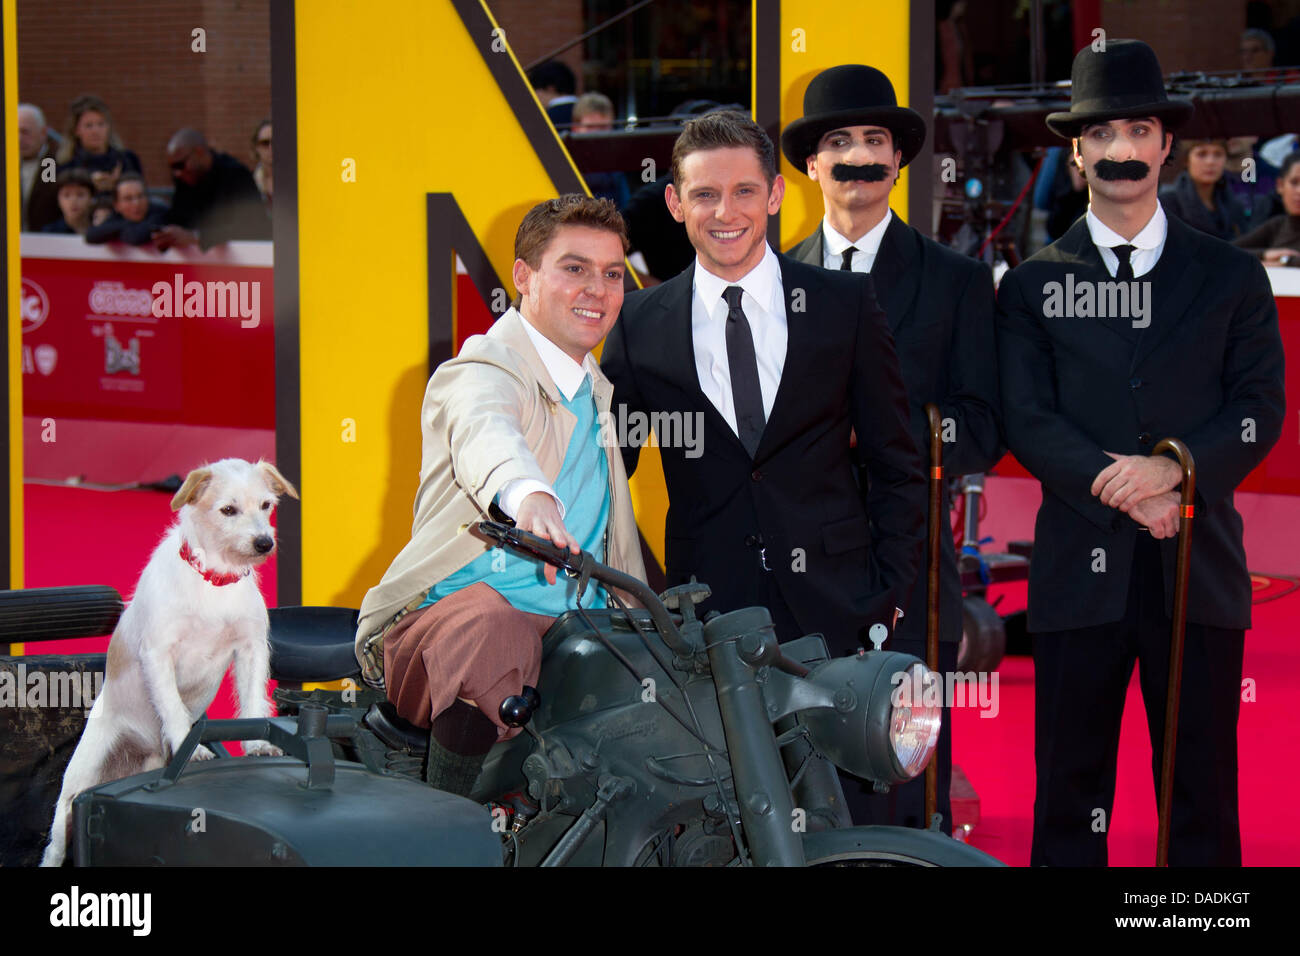 British actor Jamie Bell (3rd from R)and costume characters attend the premiere of his new film 'The Adventures Of Tin Tin' during the 6th International Rome Film Festival at Auditorium Parco Della Musica in Rome, Italy, on 28 October 2011. Photo: Hubert Boesl Stock Photo